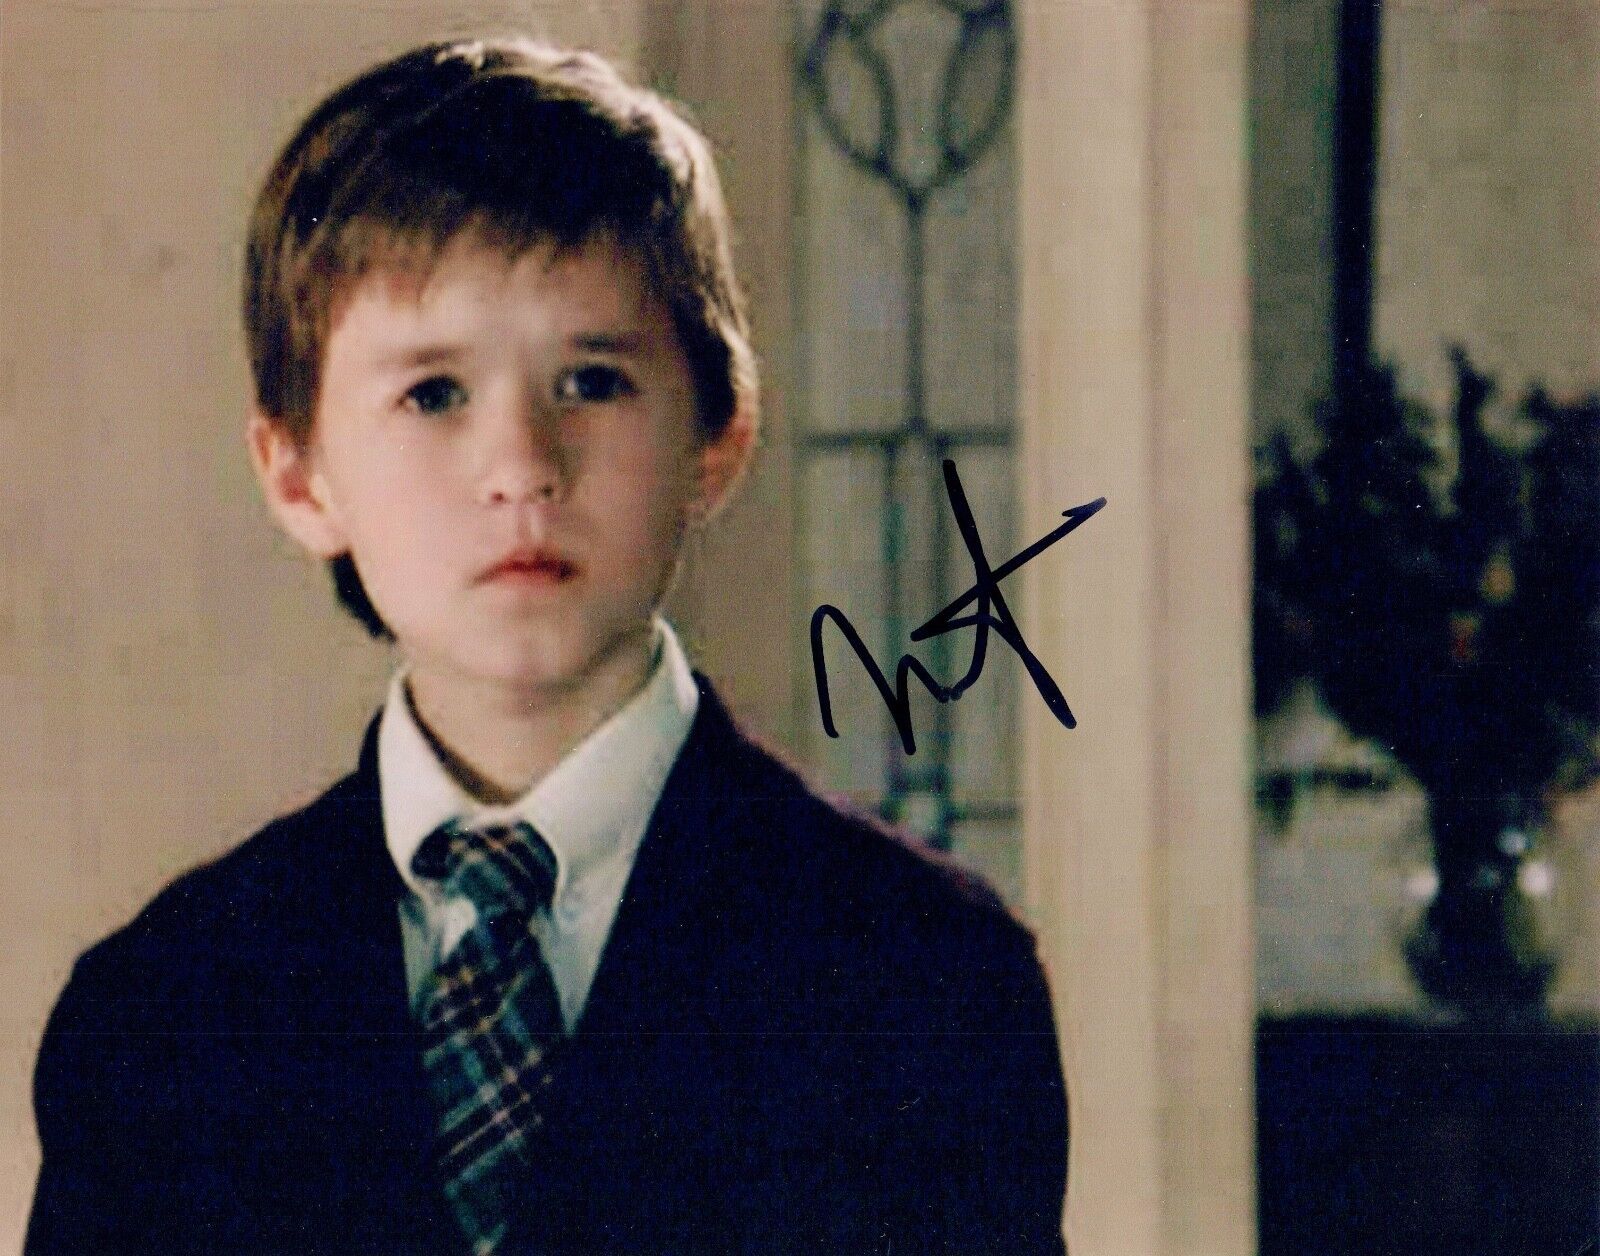 Haley Joel Osment Signed Autographed 8x10 Photo Poster painting THE SIXTH SENSE Actor COA